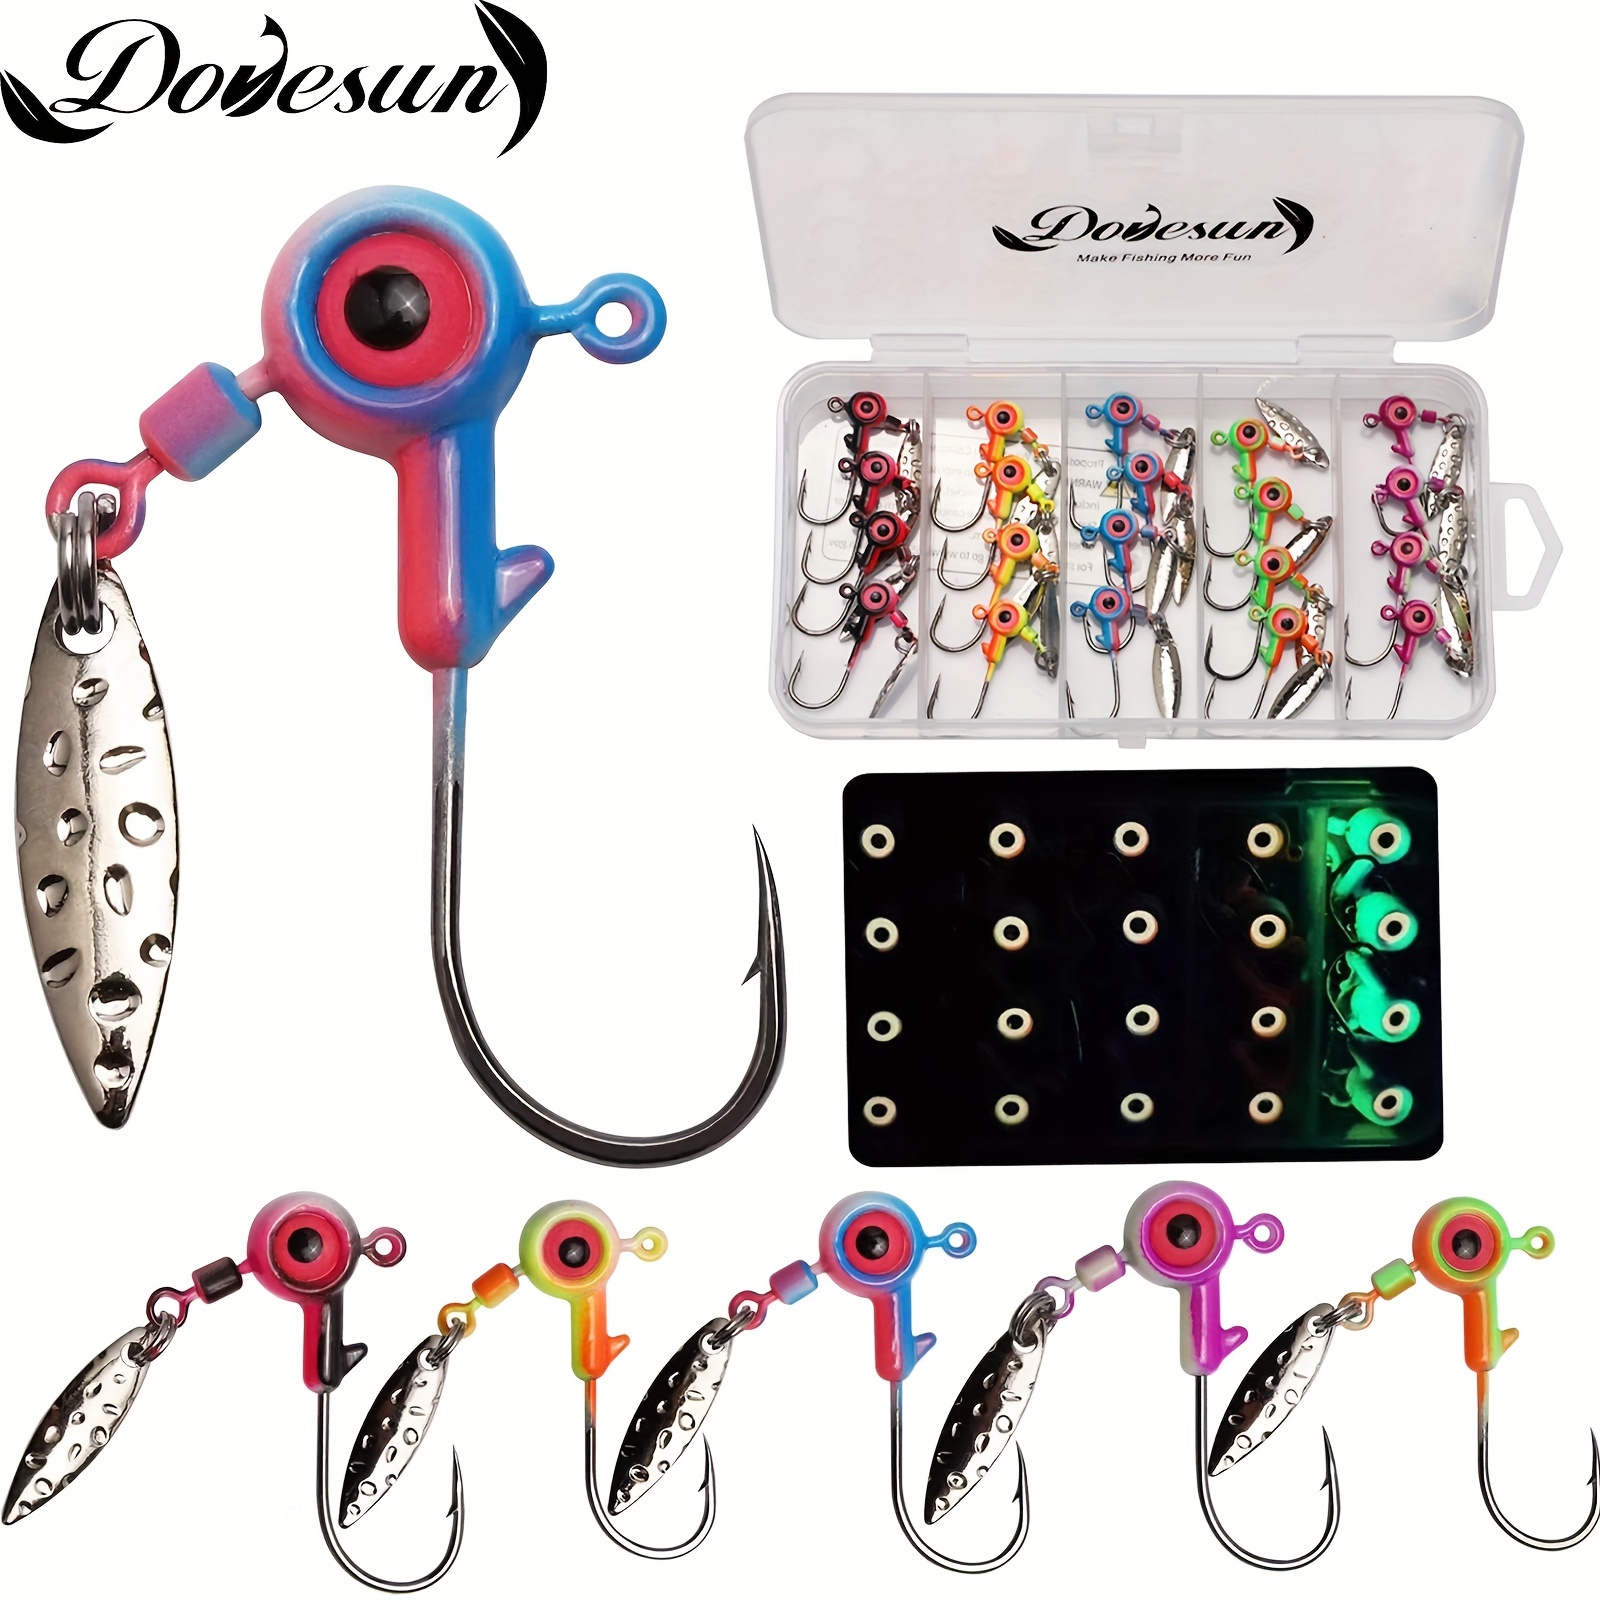 Stand Up Jig Head Kit, Crappie Jig Head for Fishing, 1/64oz 1/2oz 1/4oz  1/3oz Lead Jig Head Hook with Small Tackle Box, Swimbait Jig Head for Trout